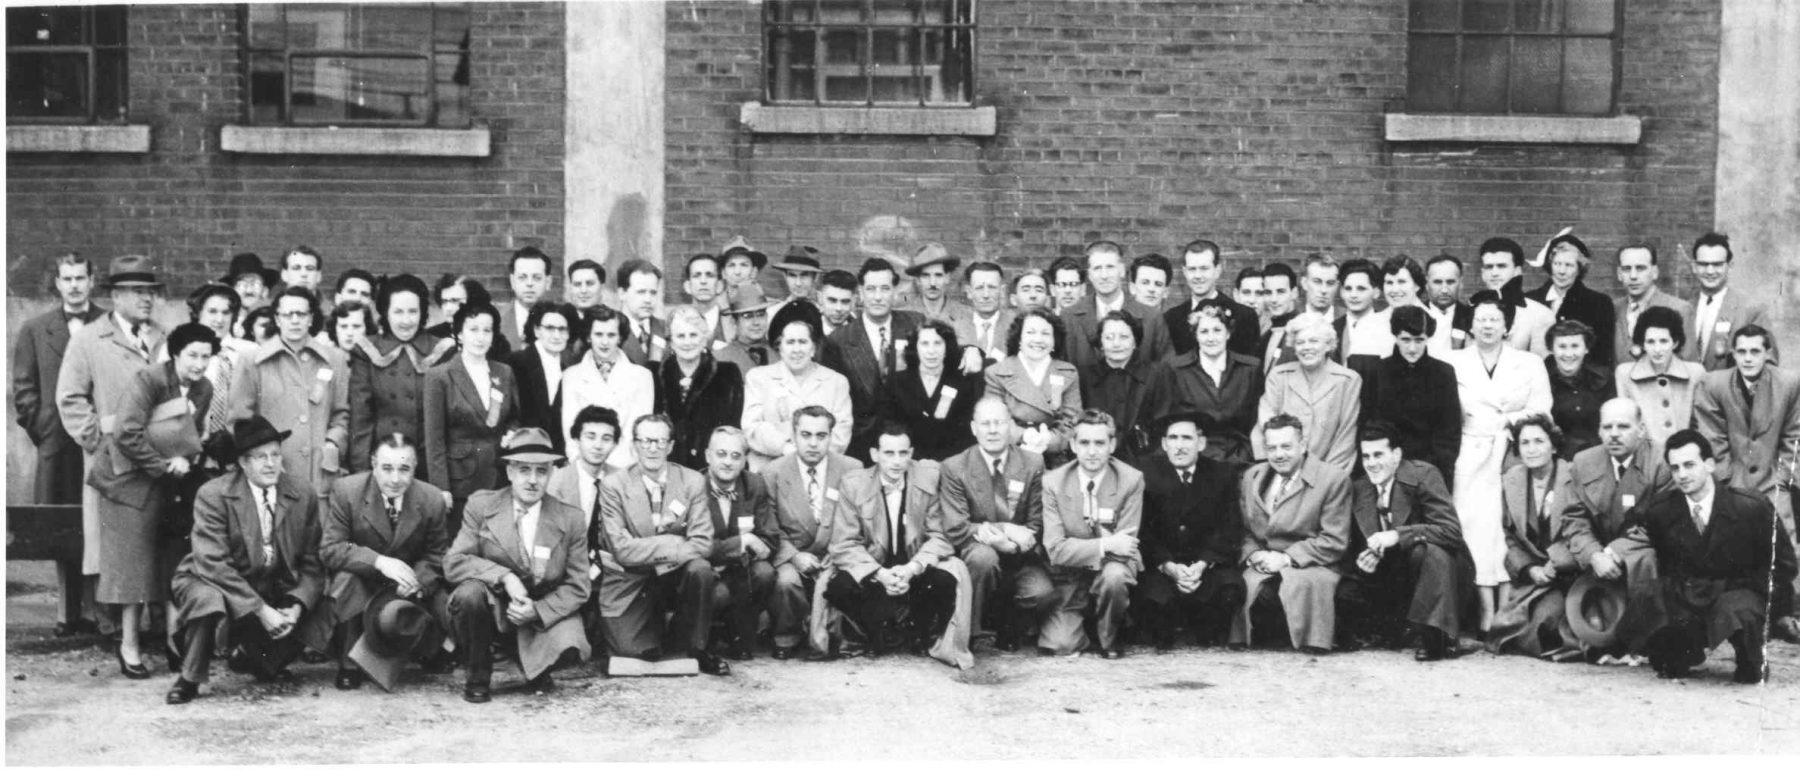 The Fur Workers' Union, National Conference in Toronto in 1951. The International Fur Workers' Union was founded by eight local unions in 1913. The union held members in both the United States and Canada.

OJA, item 803.
